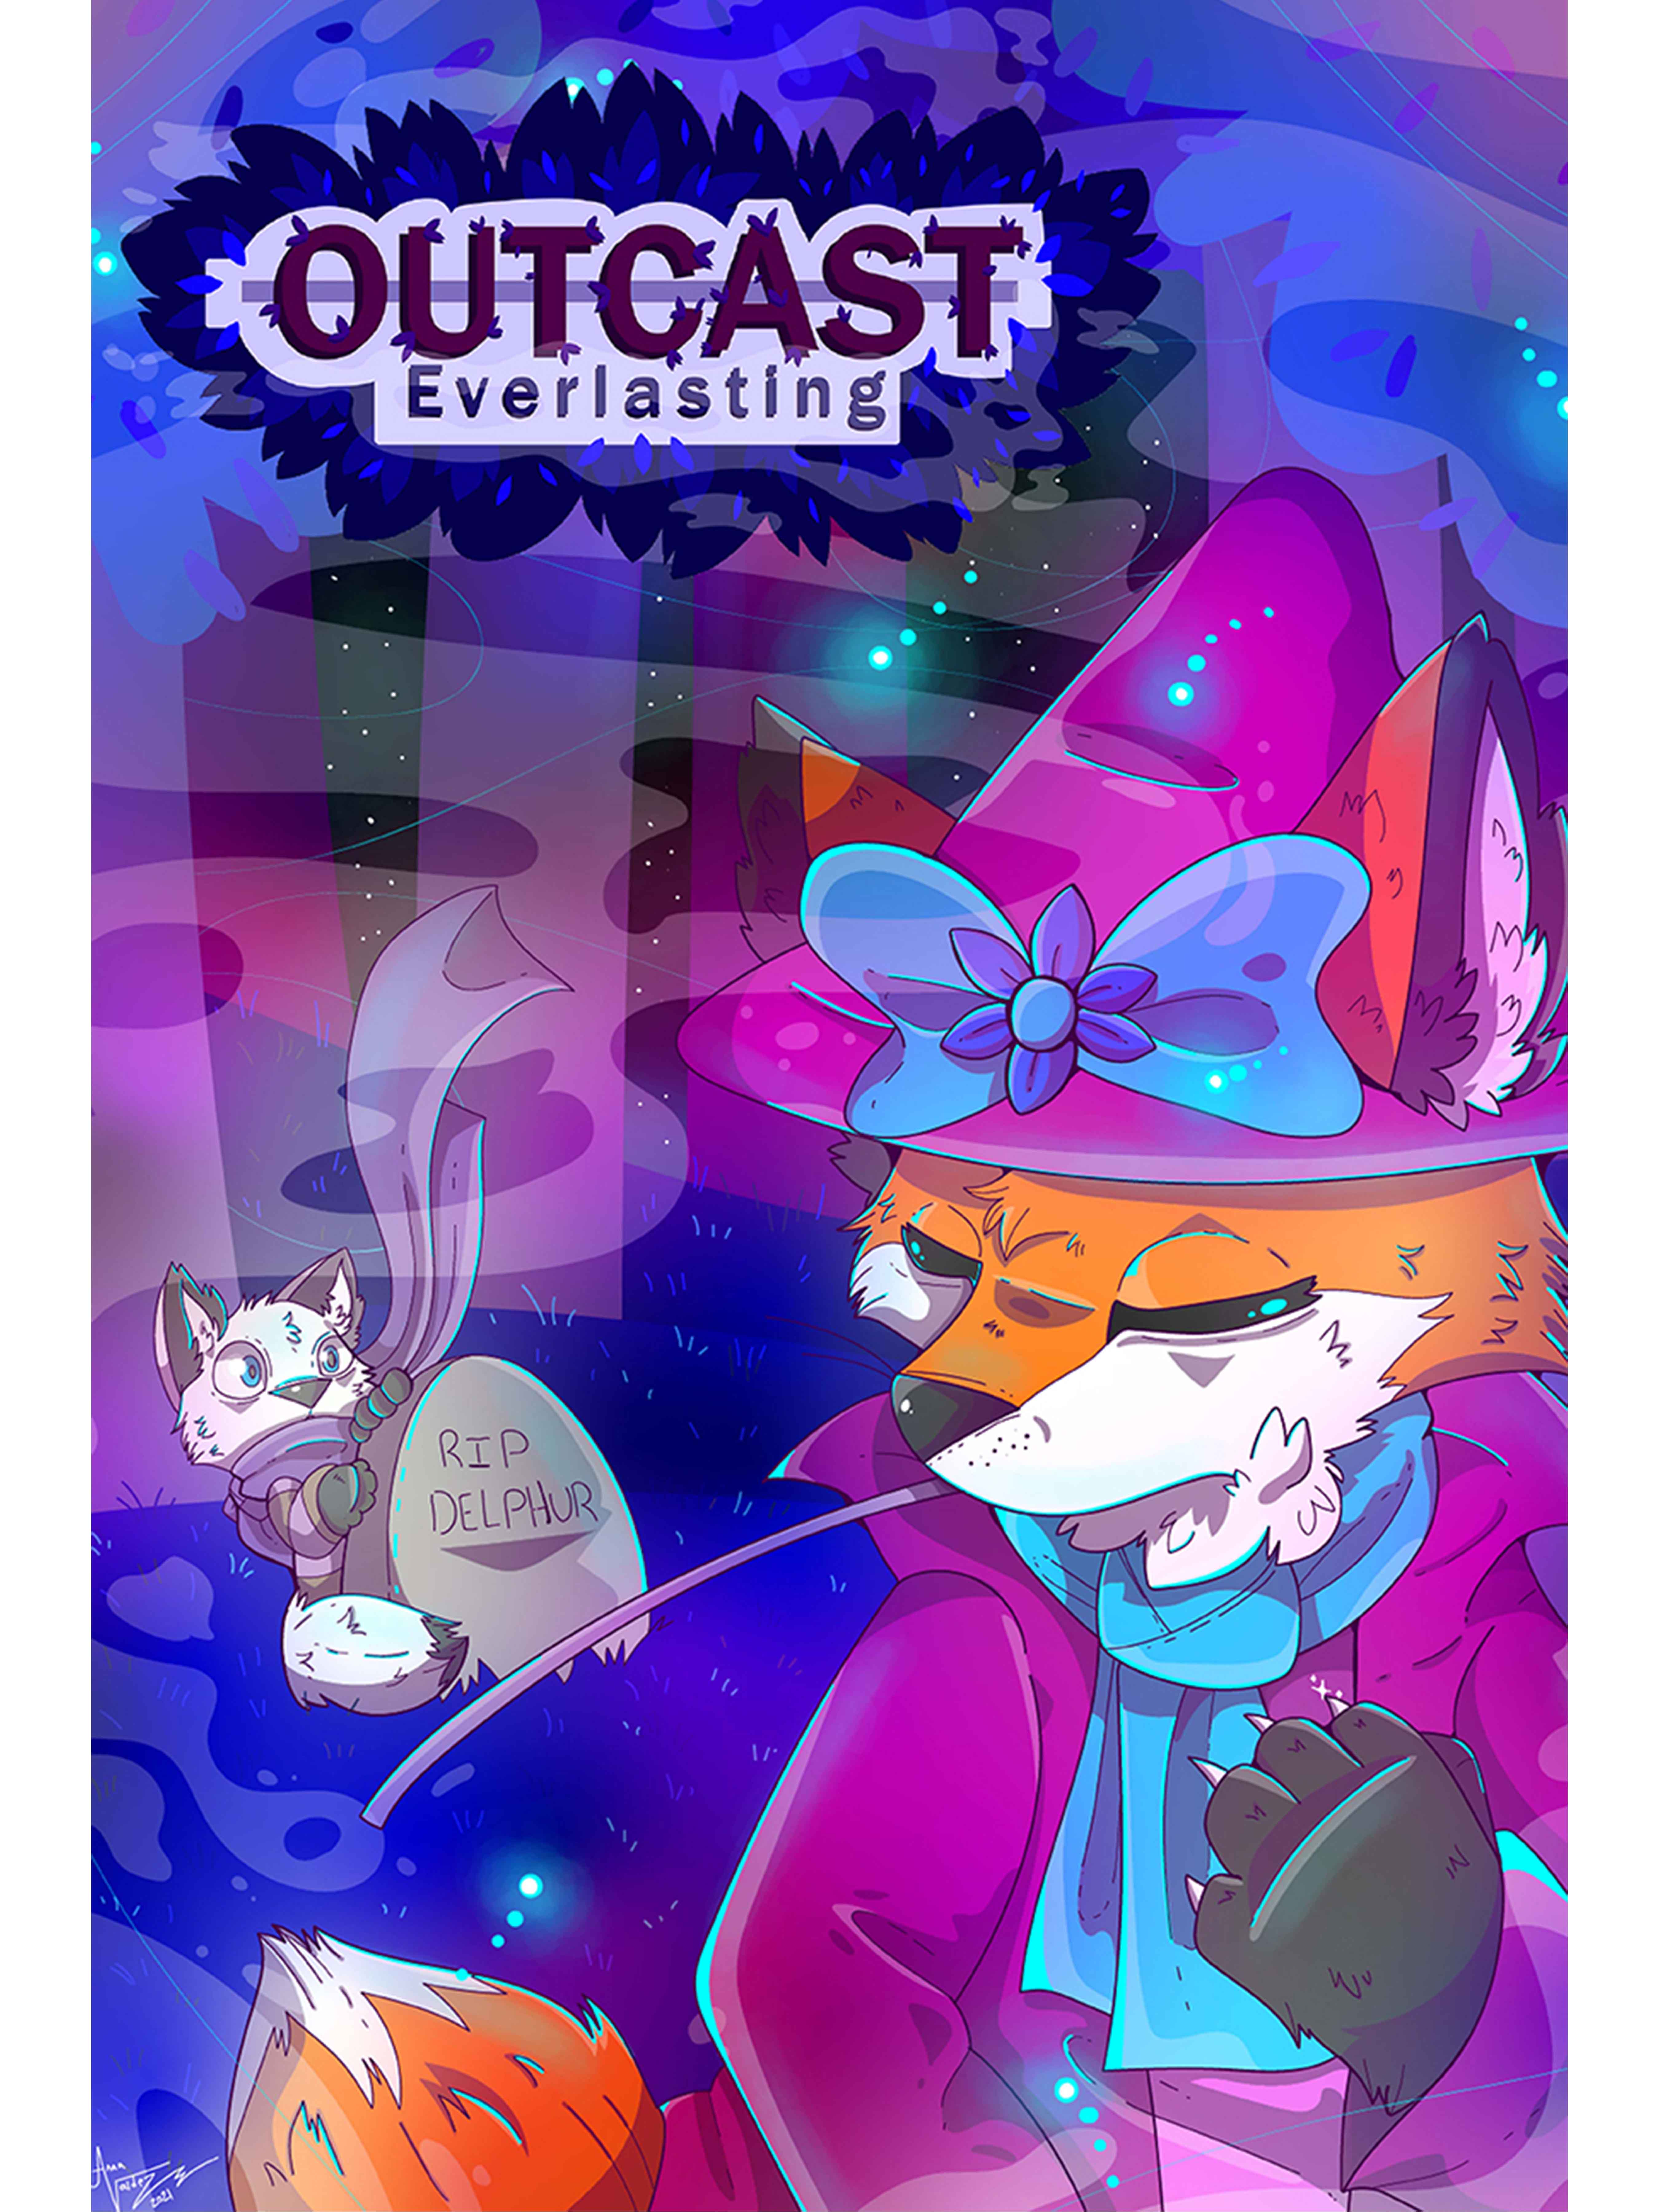  / Poster for Outcast Everlasting, featuring Foxas and Delphur! Created in Adobe Illustrator.